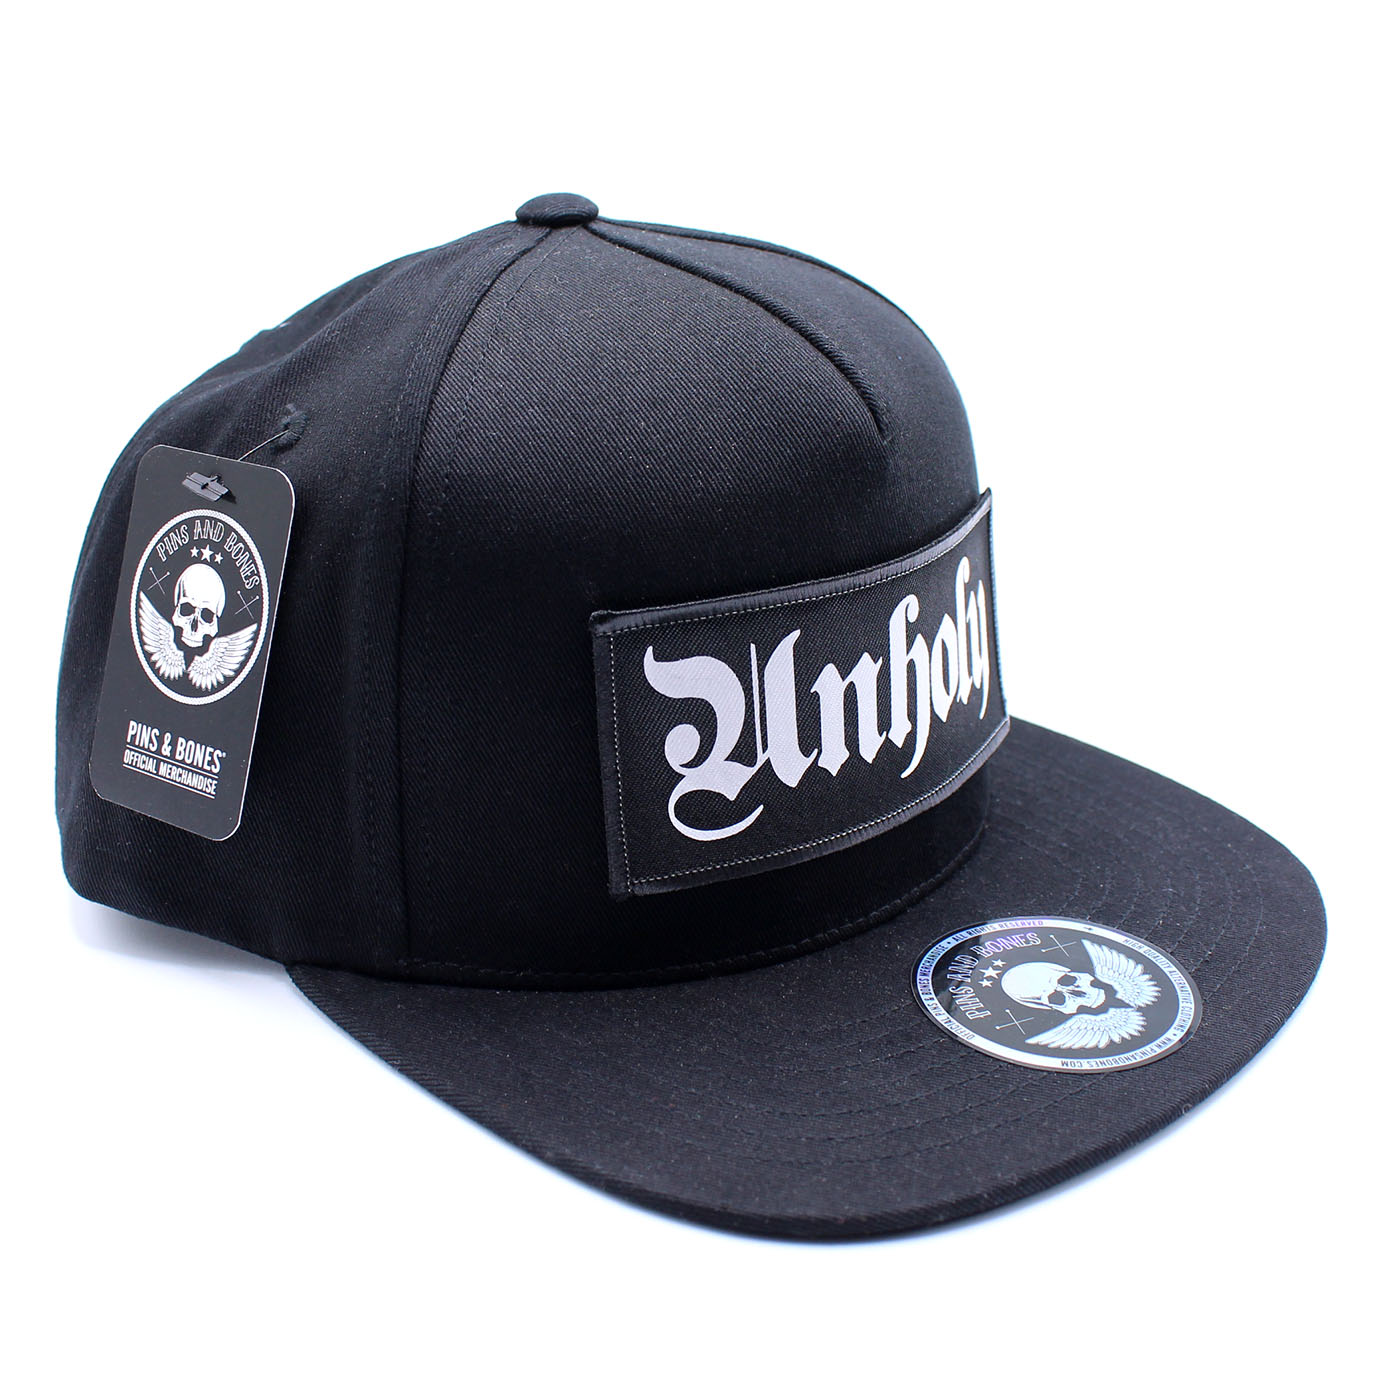 Pins & Bones Unholy Gothic Snapback Hat: One Size Fits All, Perfect for Alternative Fashion